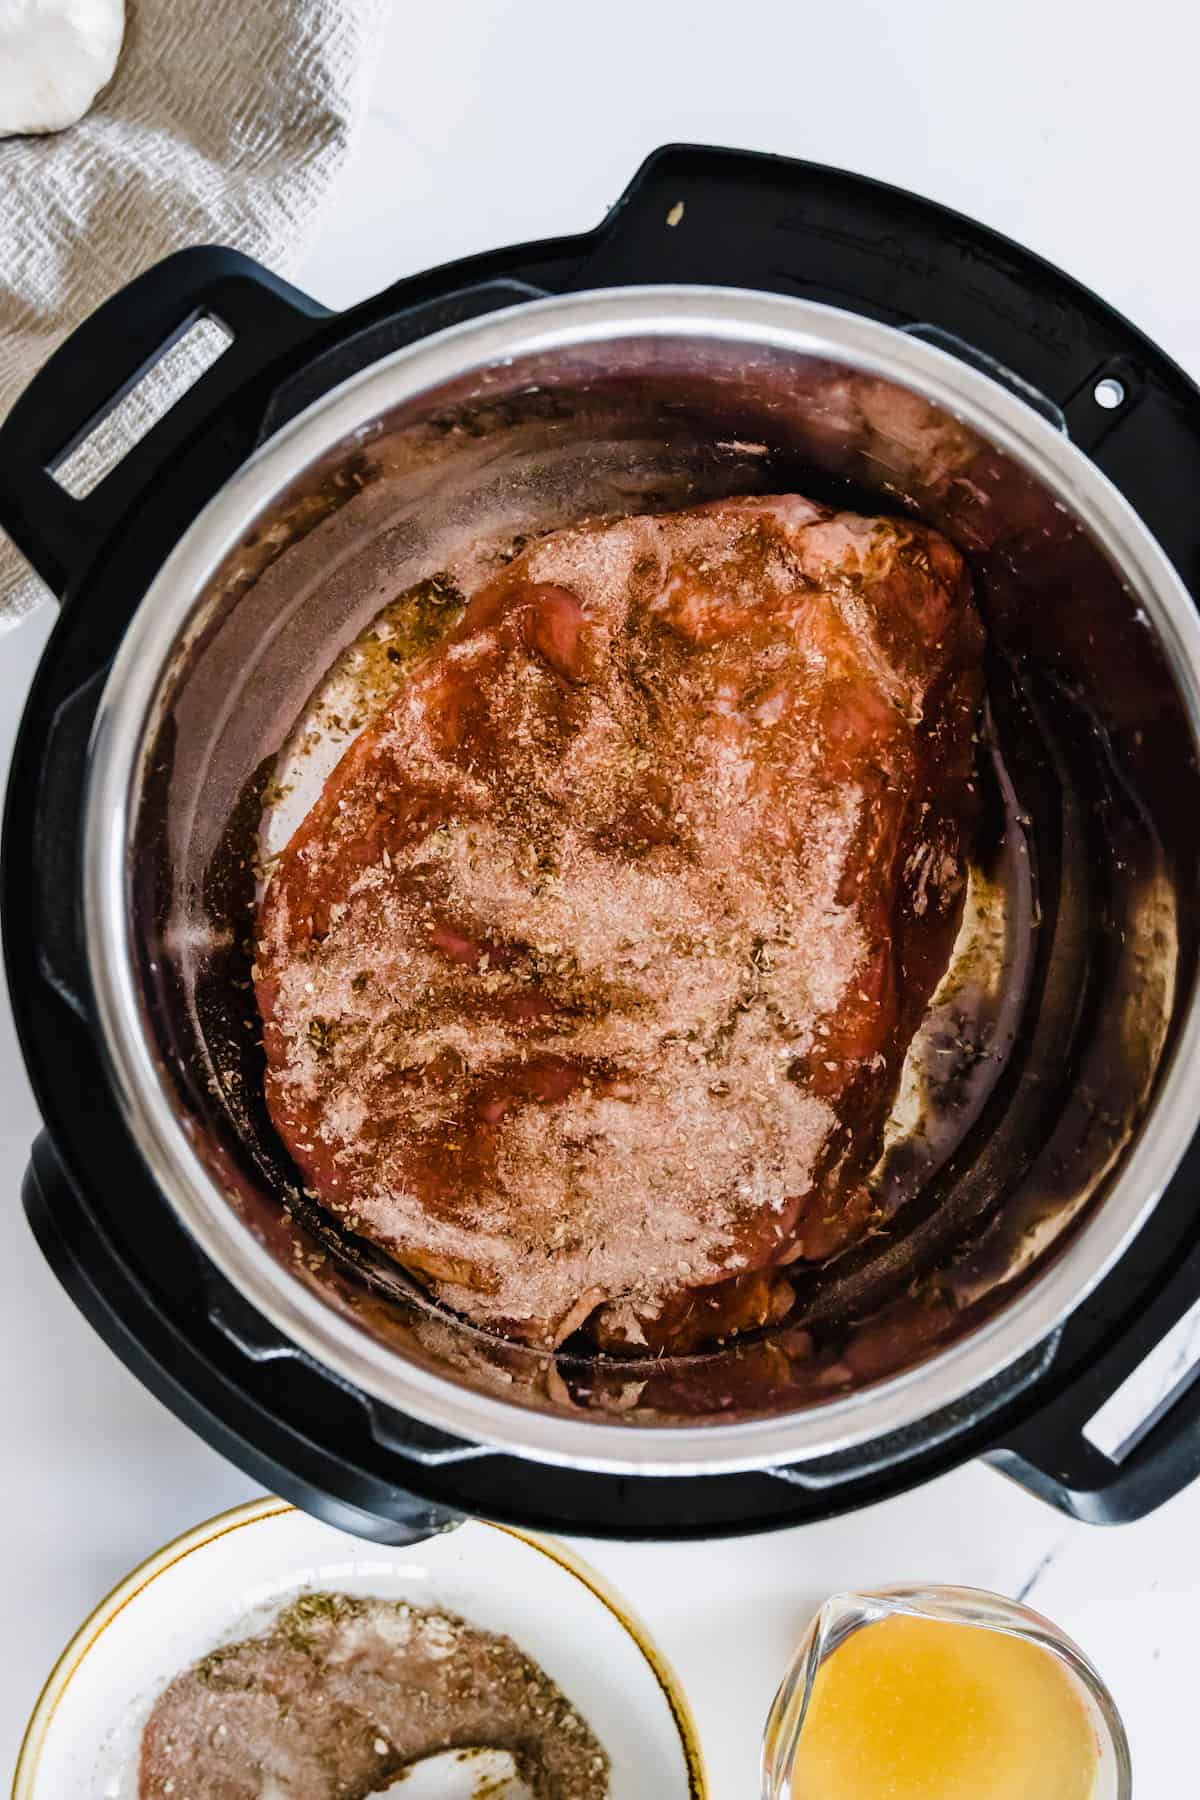 A Boneless Shoulder of Pulled Pork in an Instant Pot that has Just Been Rubbed with the Spice Rub